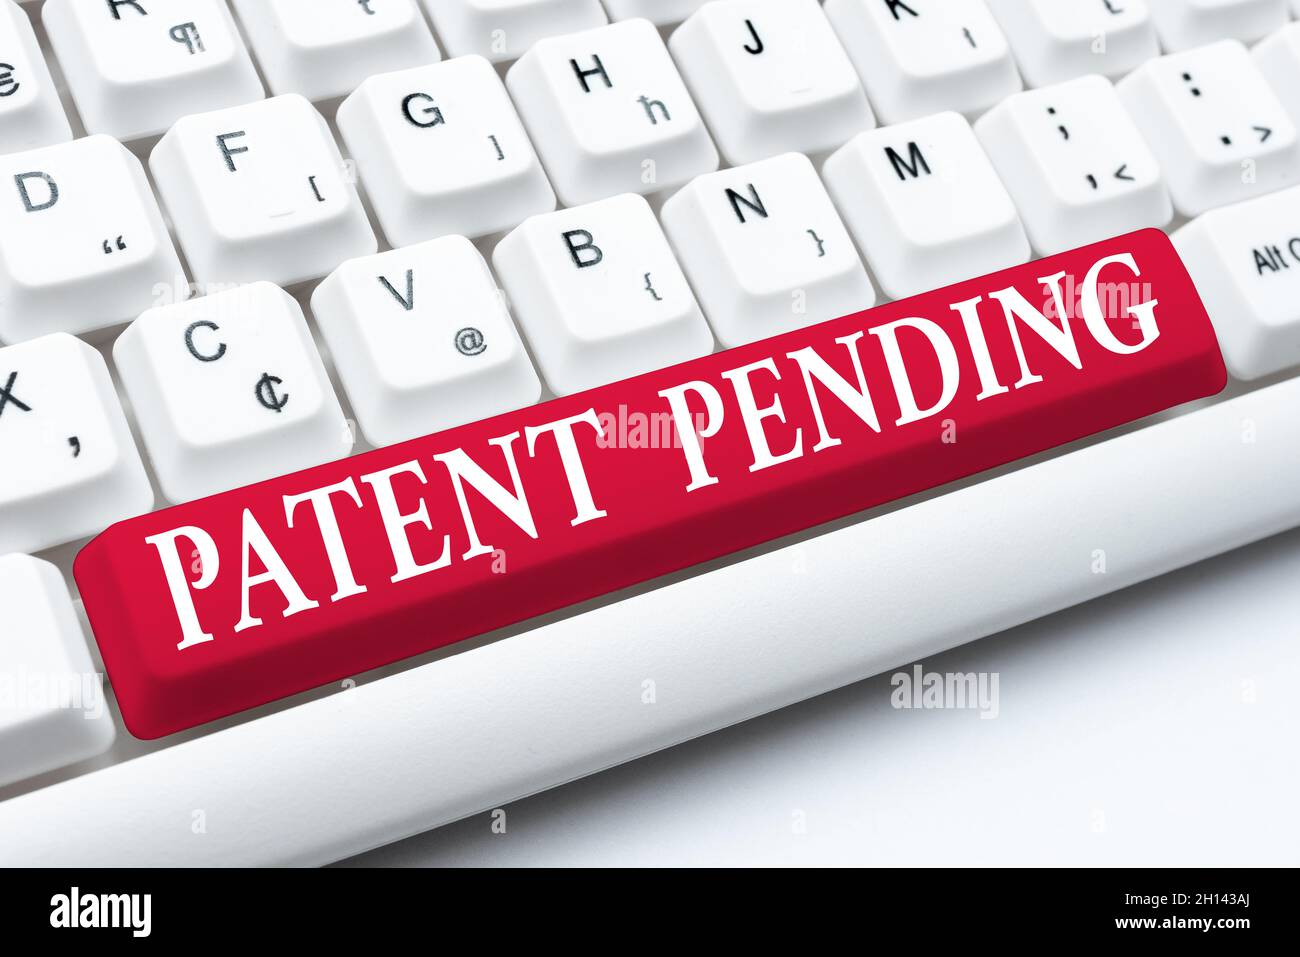 Writing displaying text Patent Pending. Business approach Request already filed but not yet granted Pursuing protection Fixing Internet Problems Stock Photo